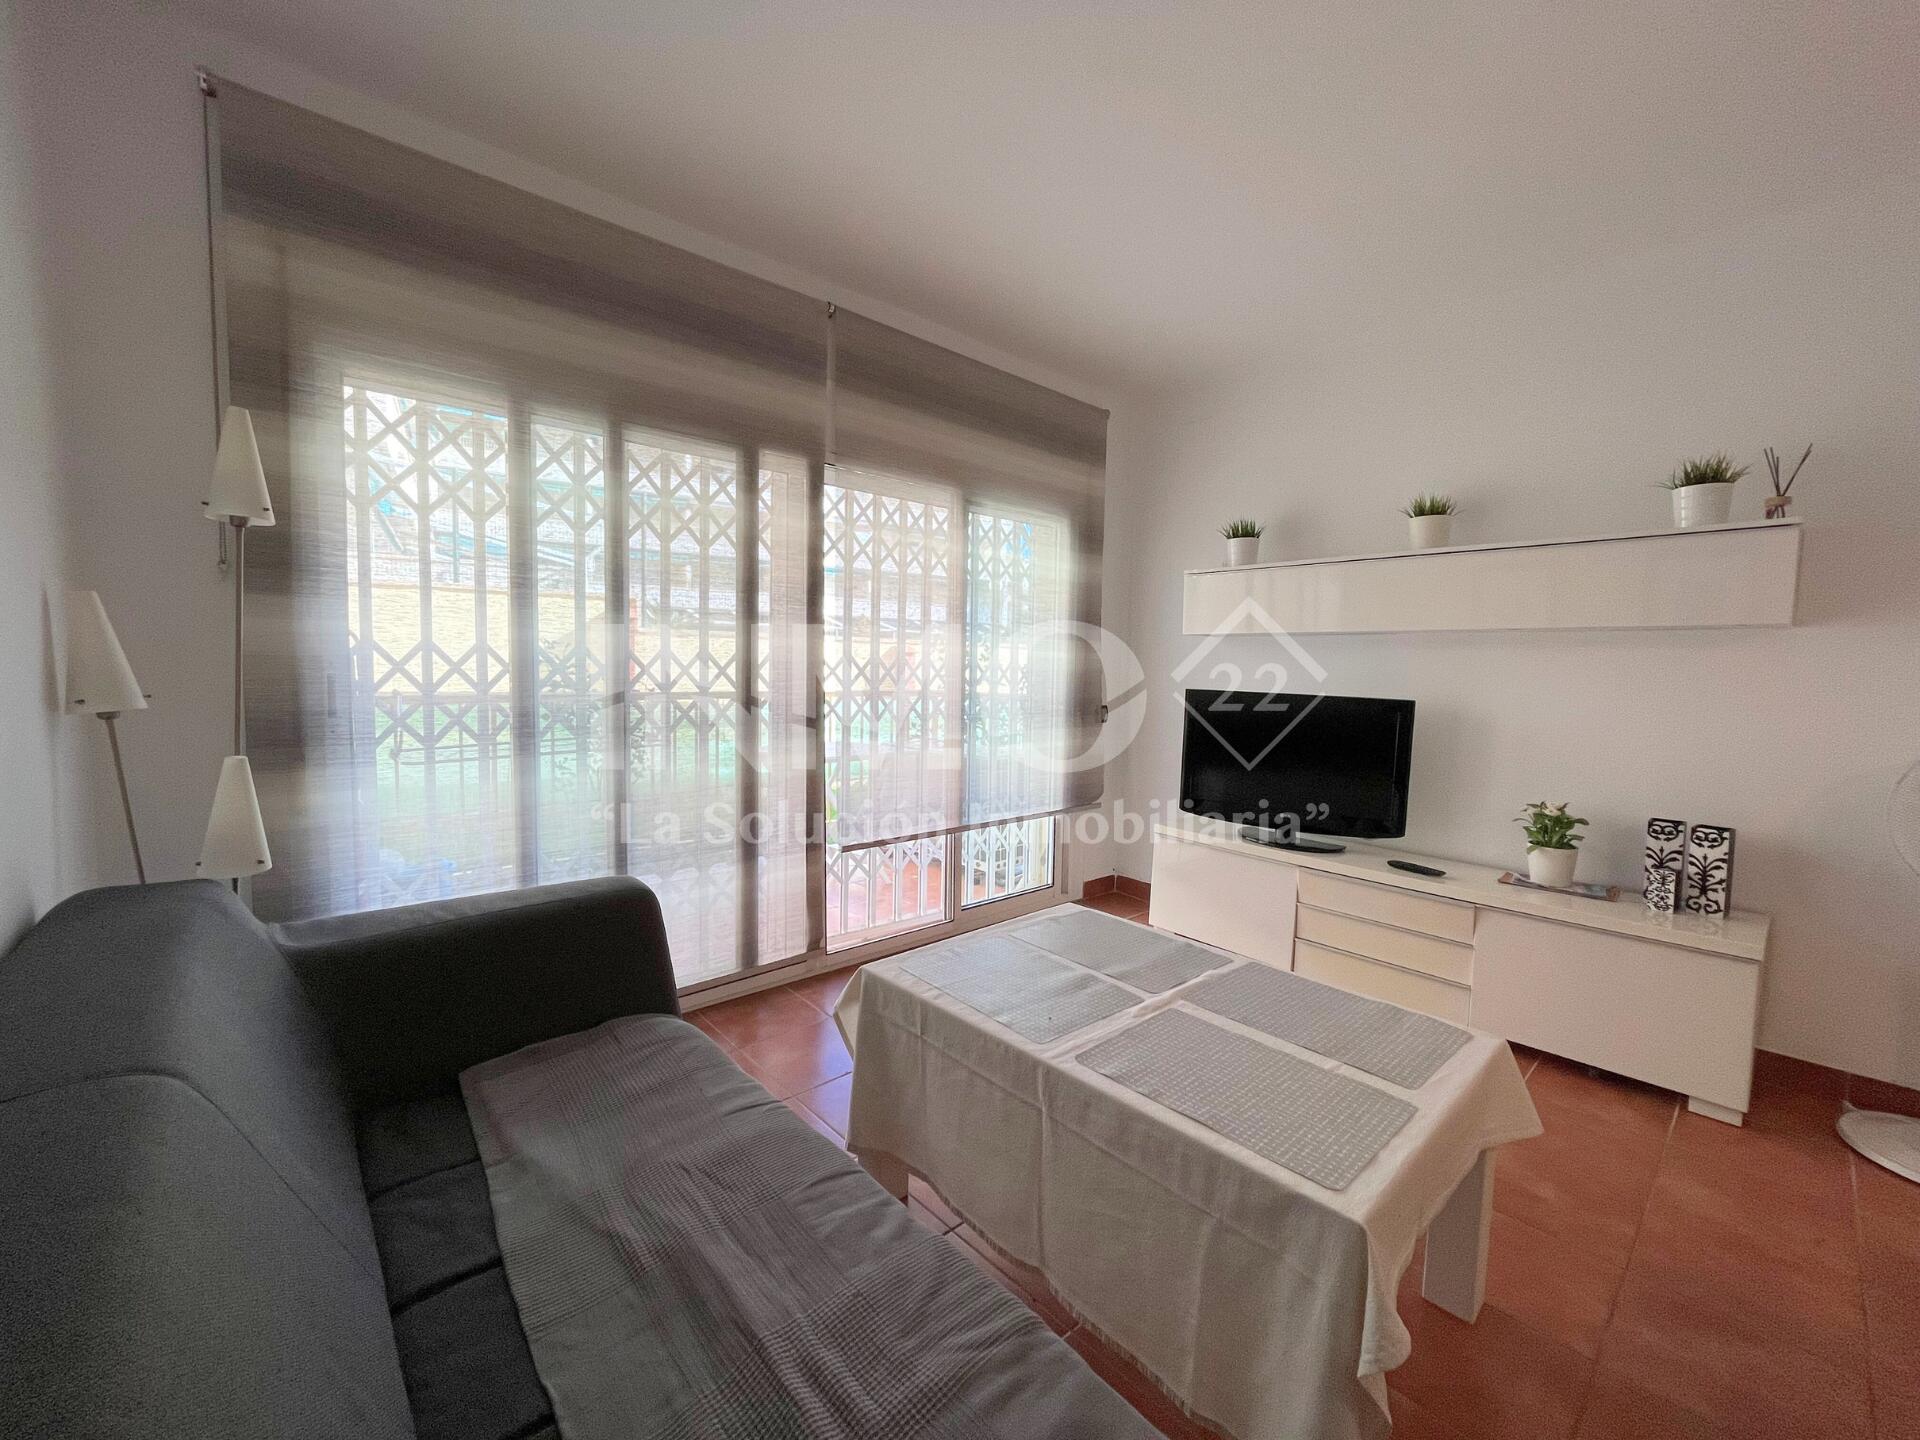 Appartement -
                                            Cambrils -
                                            2 chambres -
                                            4 occupants